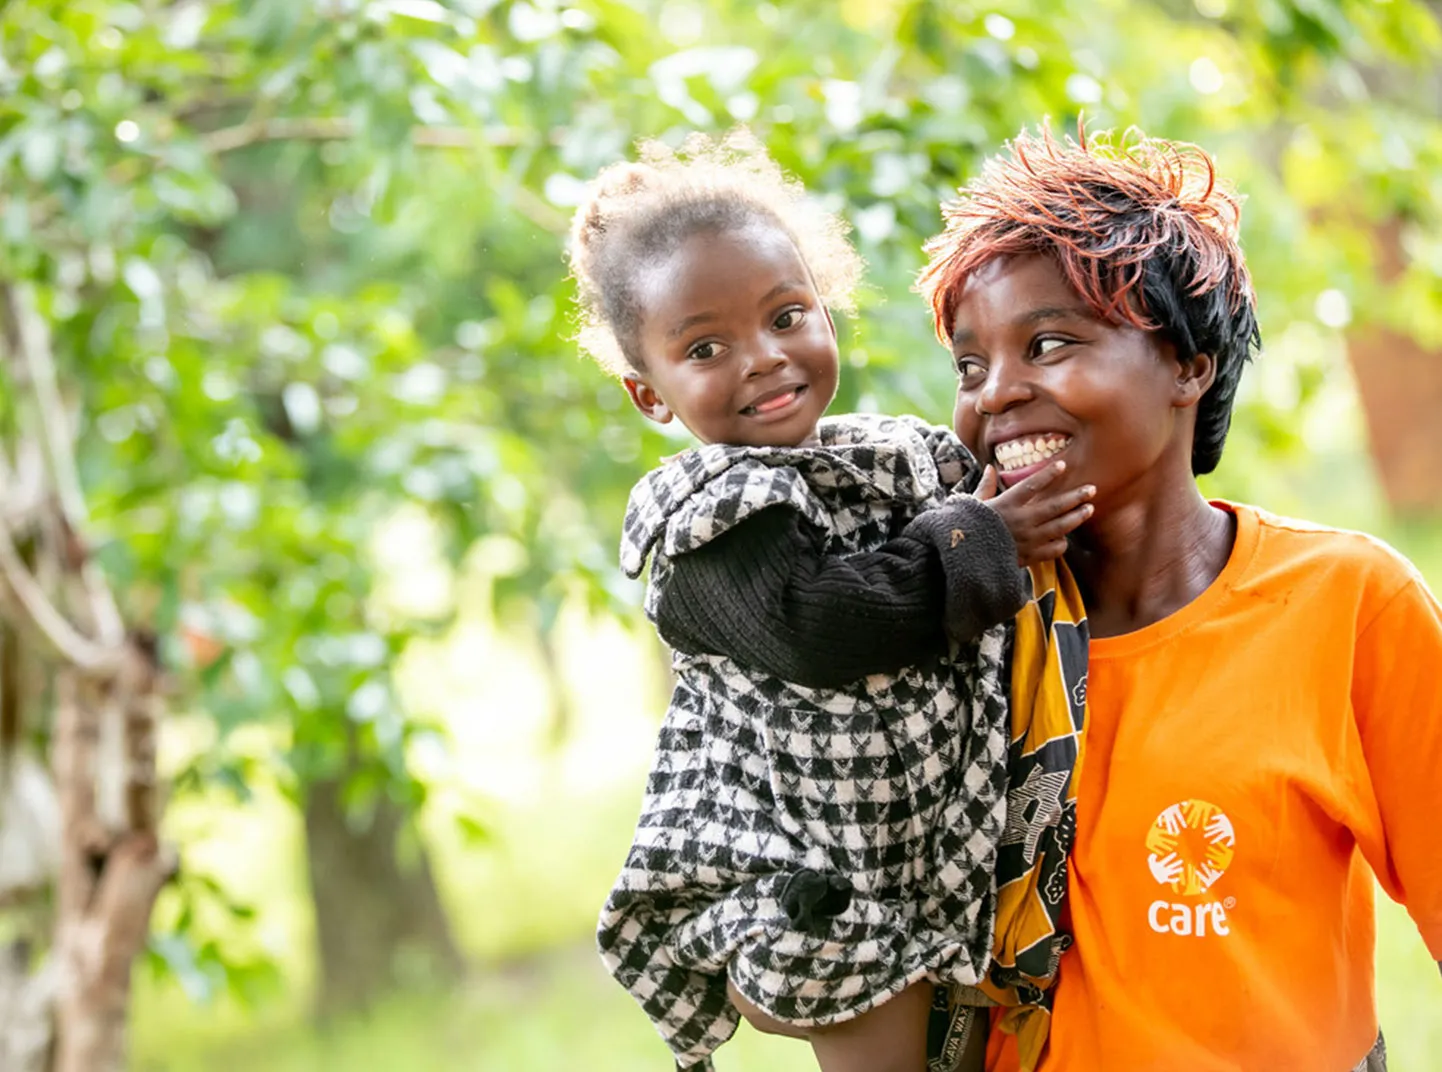 A CARE staffer wearing a bright orange CARE shirt smiles while holding a young girl wearing a black and white checked dress.